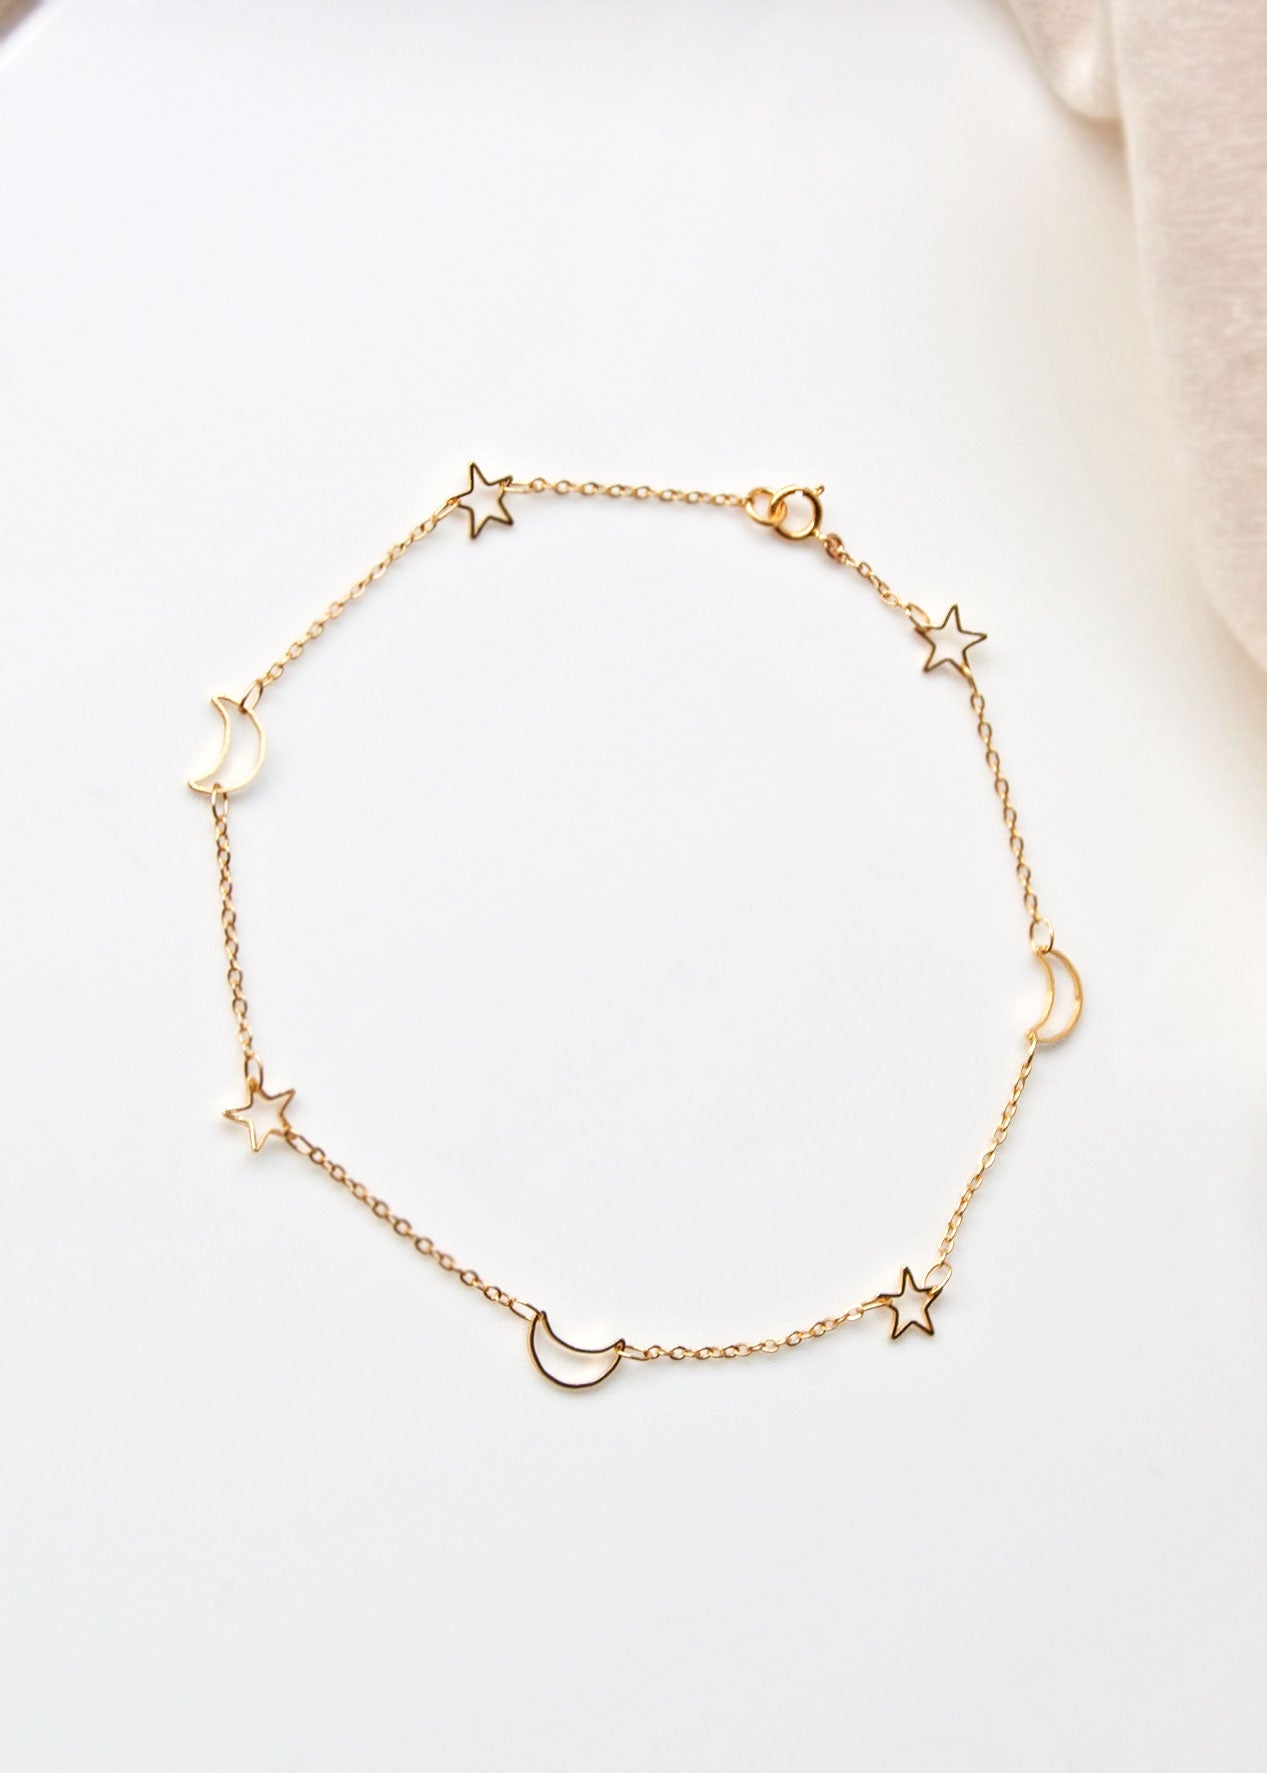 Moon and Star Gold Choker Necklace Celestial Jewelry Gifts for Girls